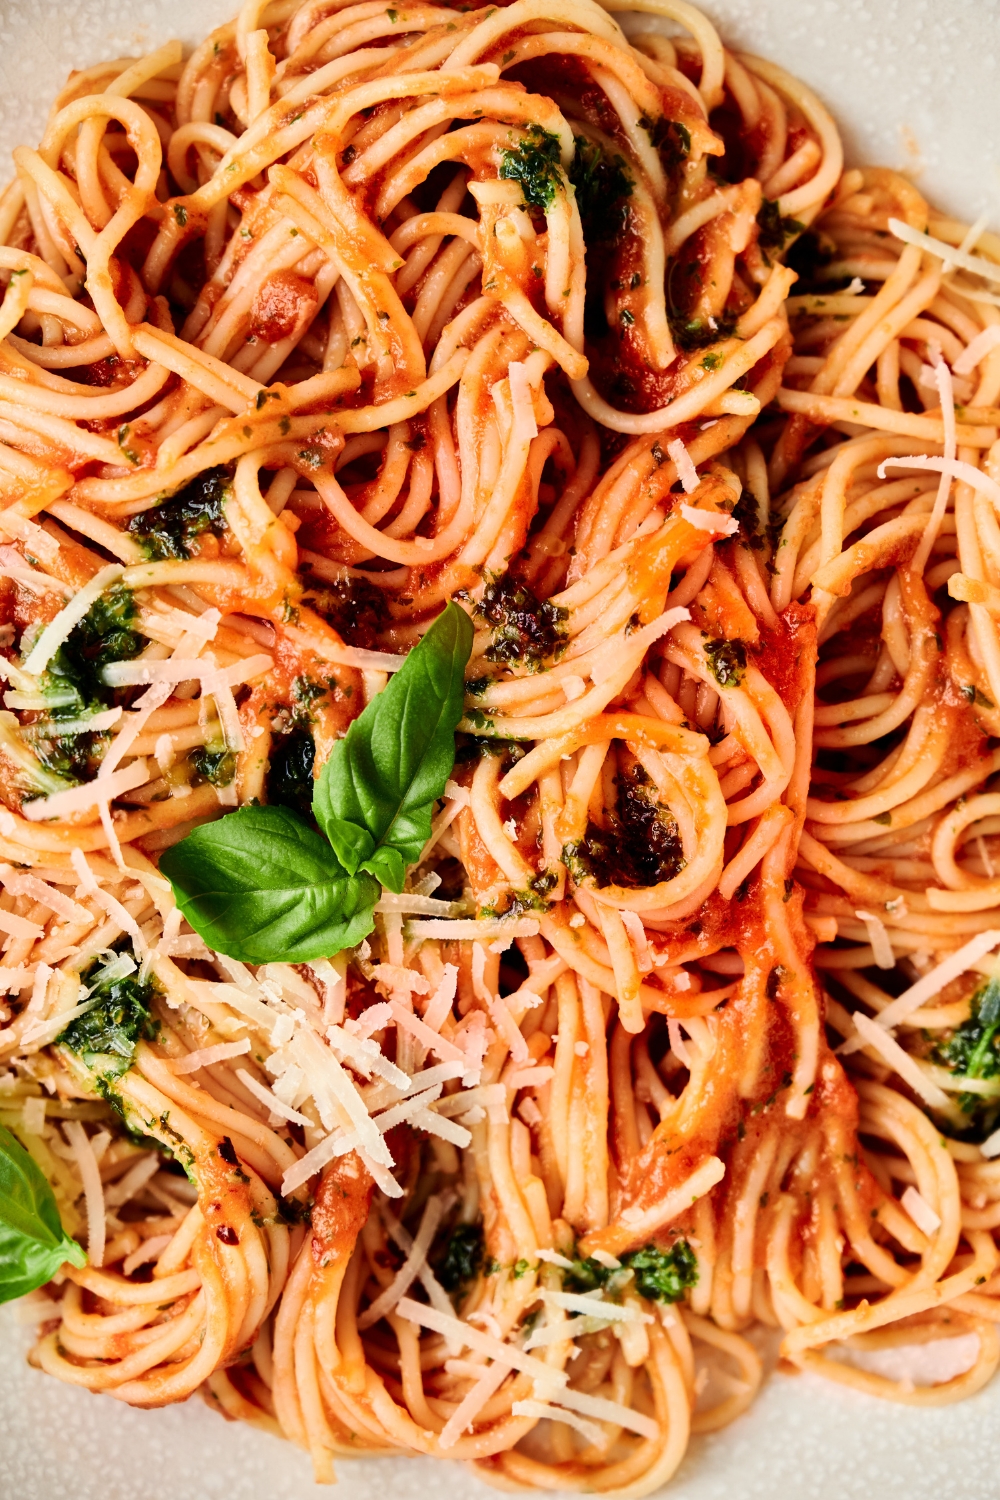 A bowl of spaghetti pomodoro garnished with fresh herbs and Parmesan cheese.